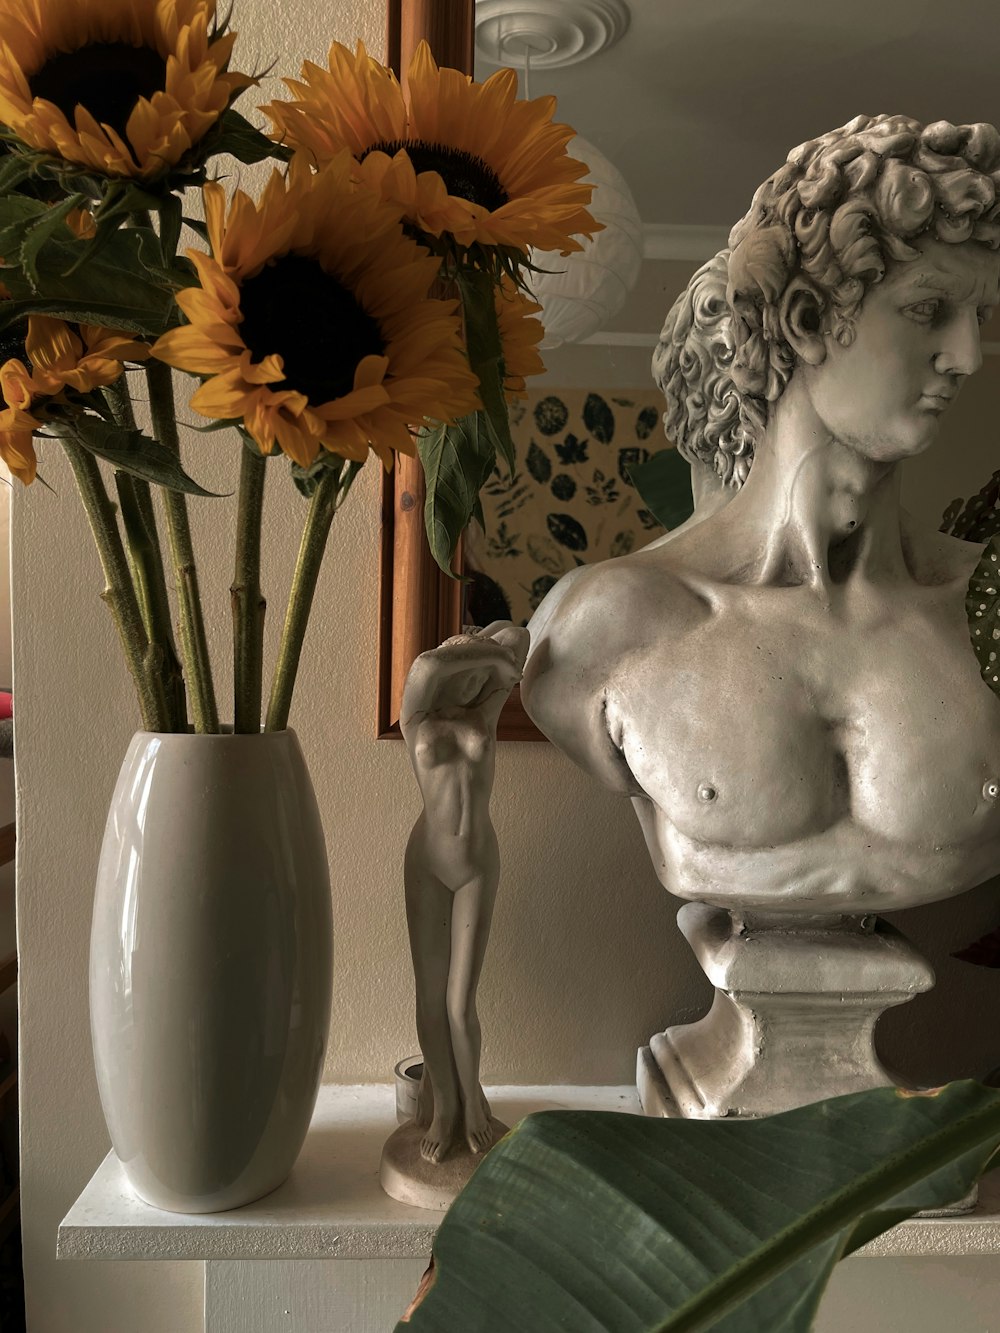 a vase with sunflowers and a statue of a woman